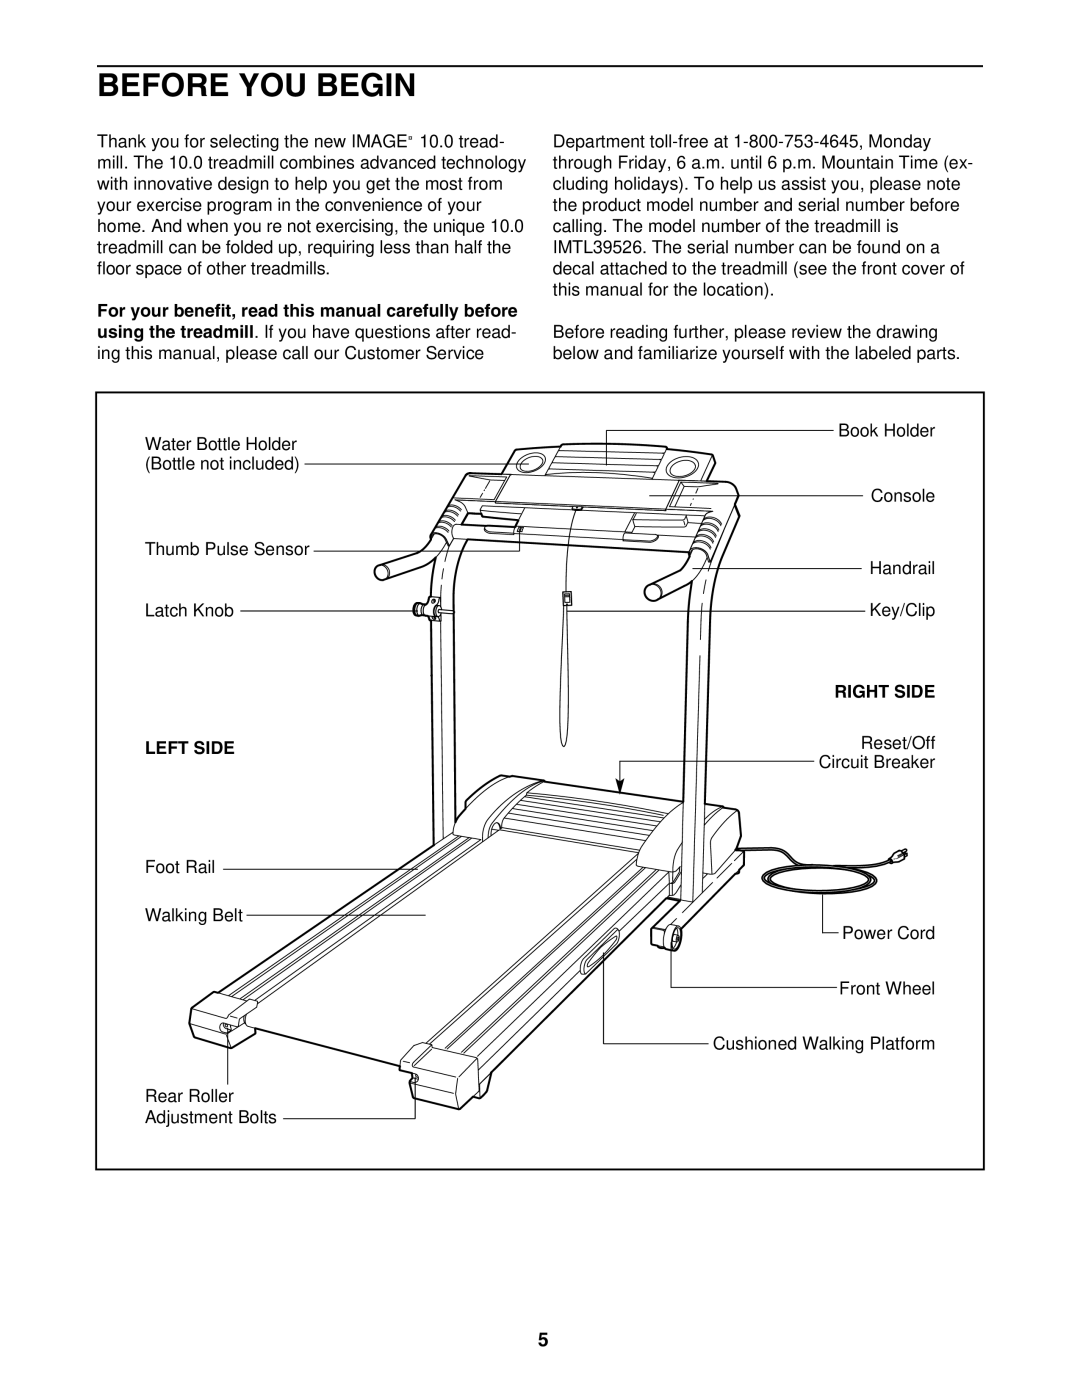 Image IMTL39526 user manual Before YOU Begin, Right Side, Left Side 